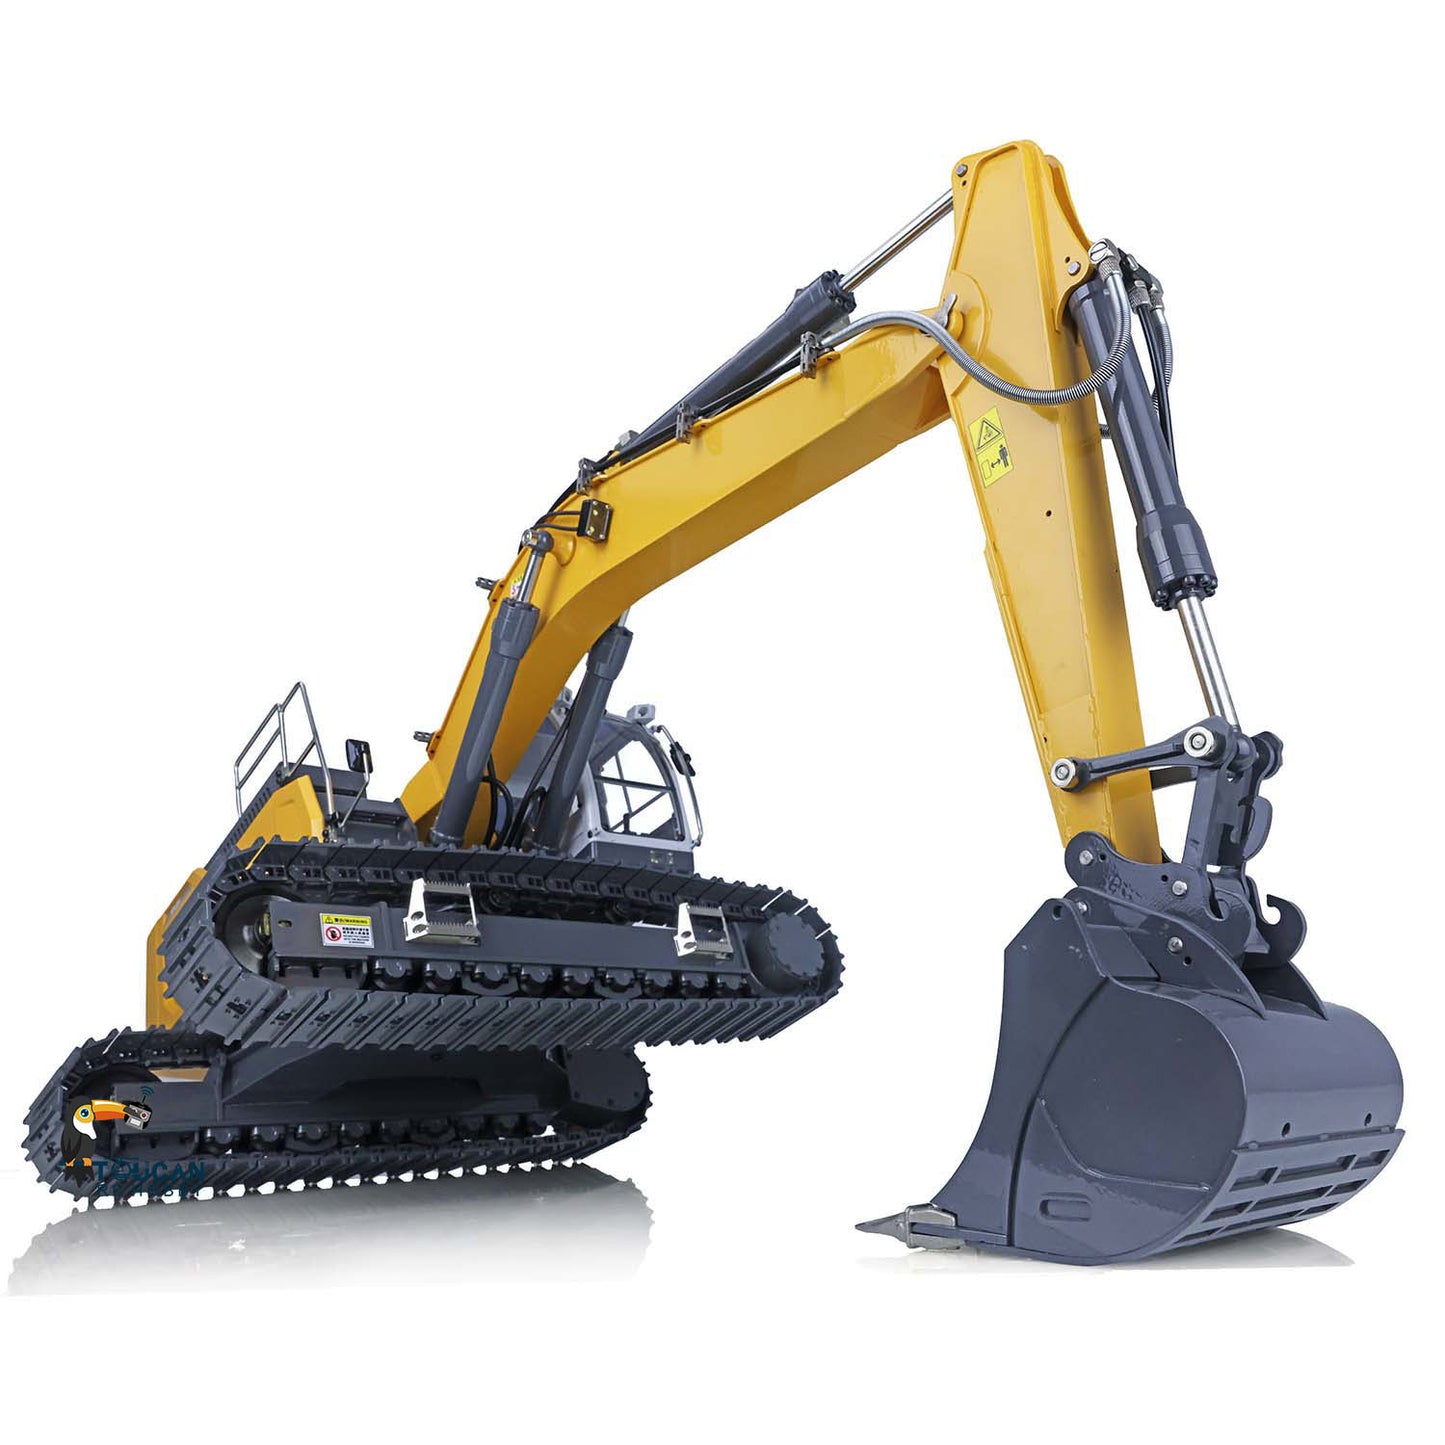 945 Metal 1/14 Hydraulic RC Tracked Excavator Remote Control Painted Assembled Truck W/ I6s ESC Motor Servo Coupler